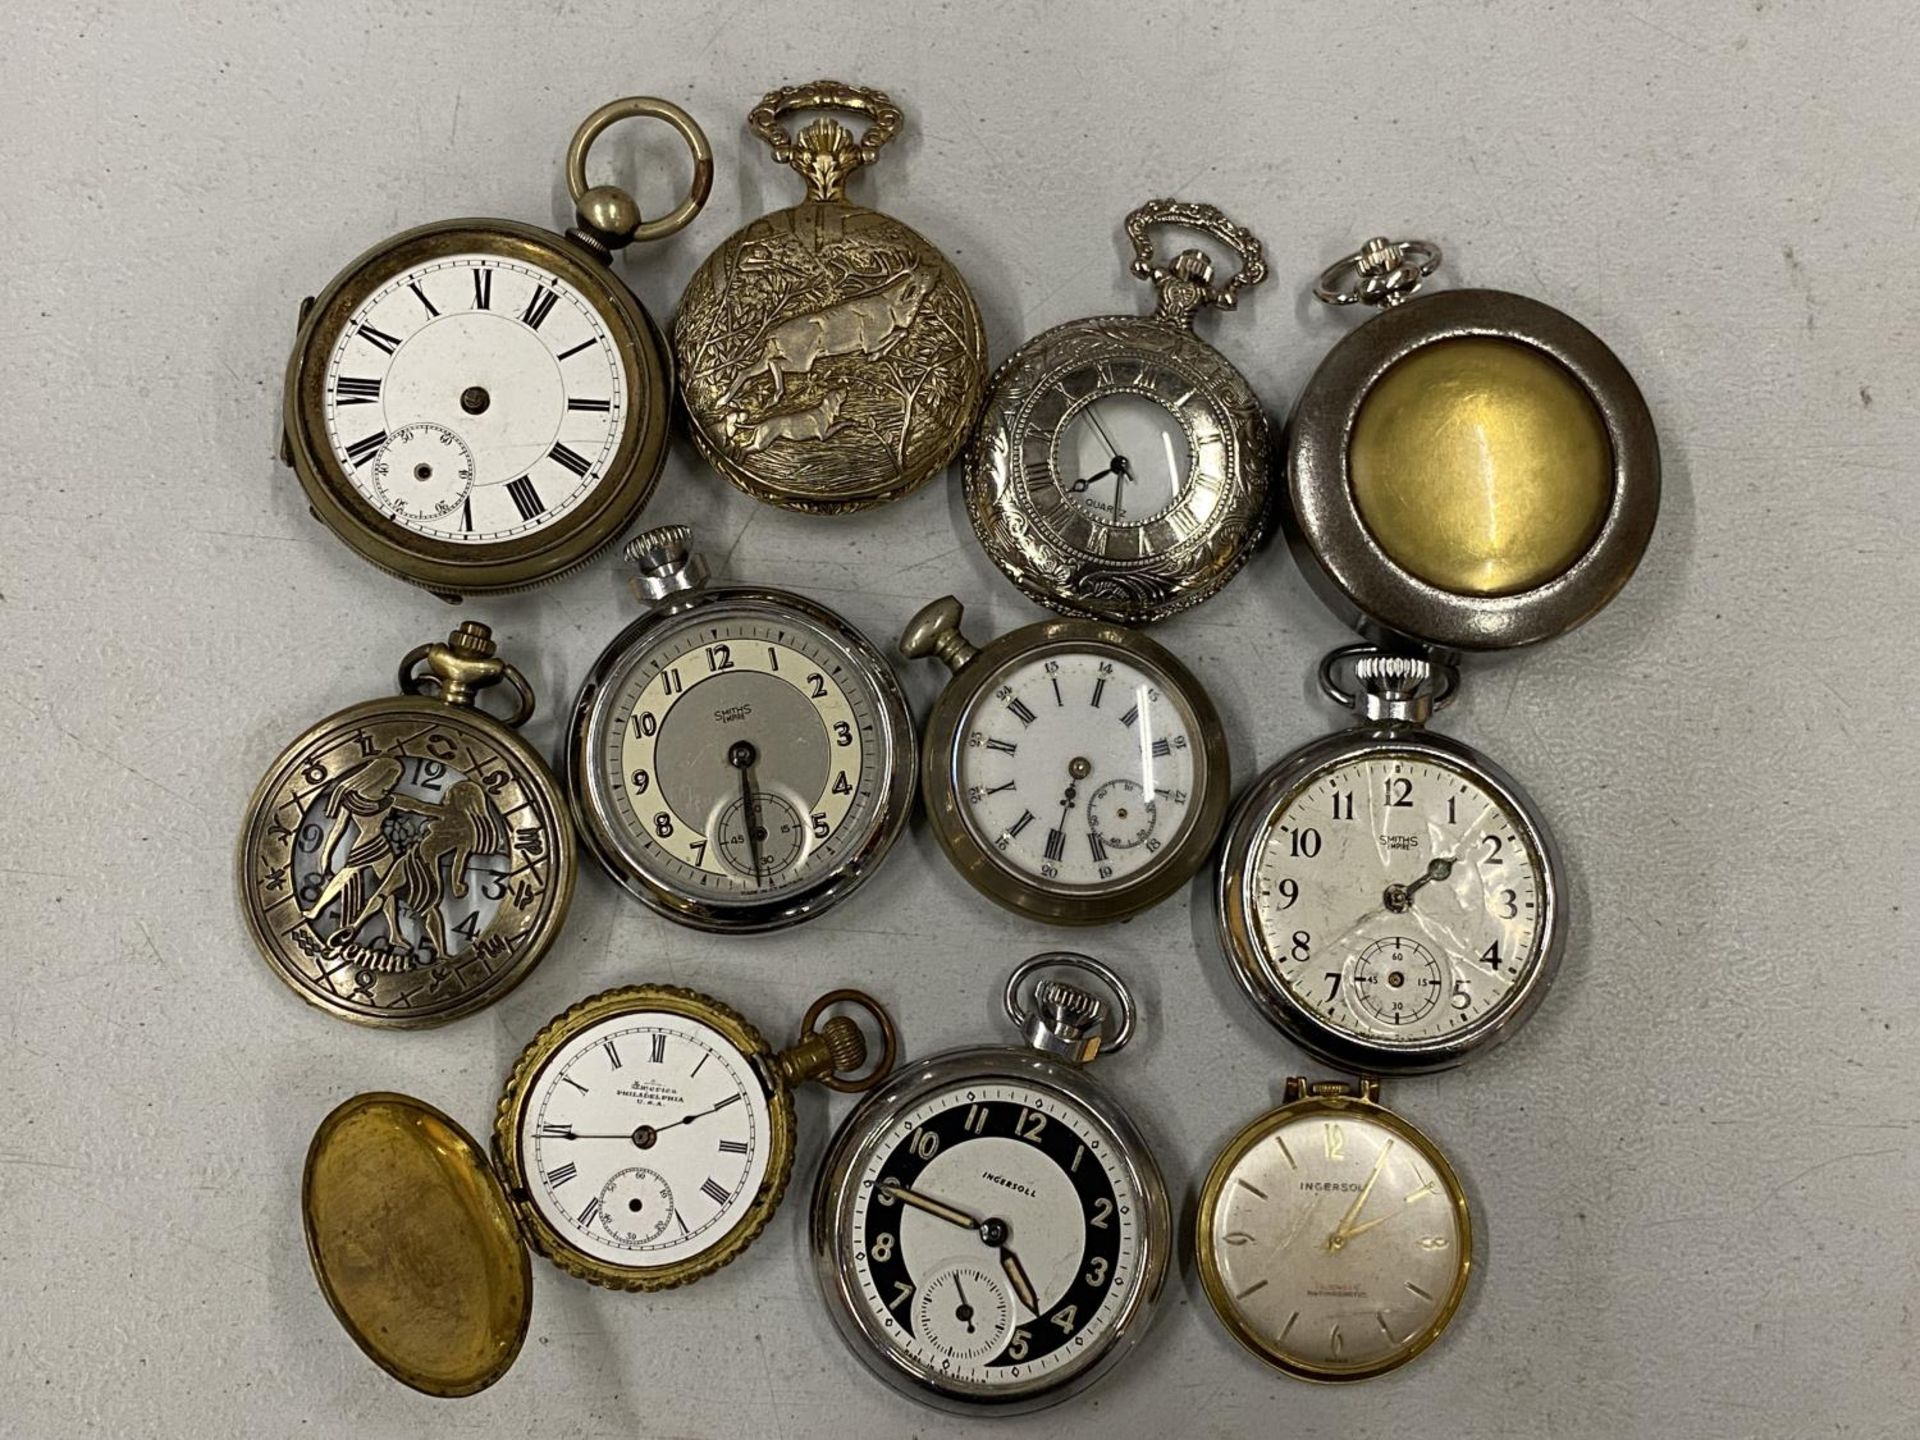 A MIXED GROUP OF MODERN AND VINTAGE POCKET WATCHES